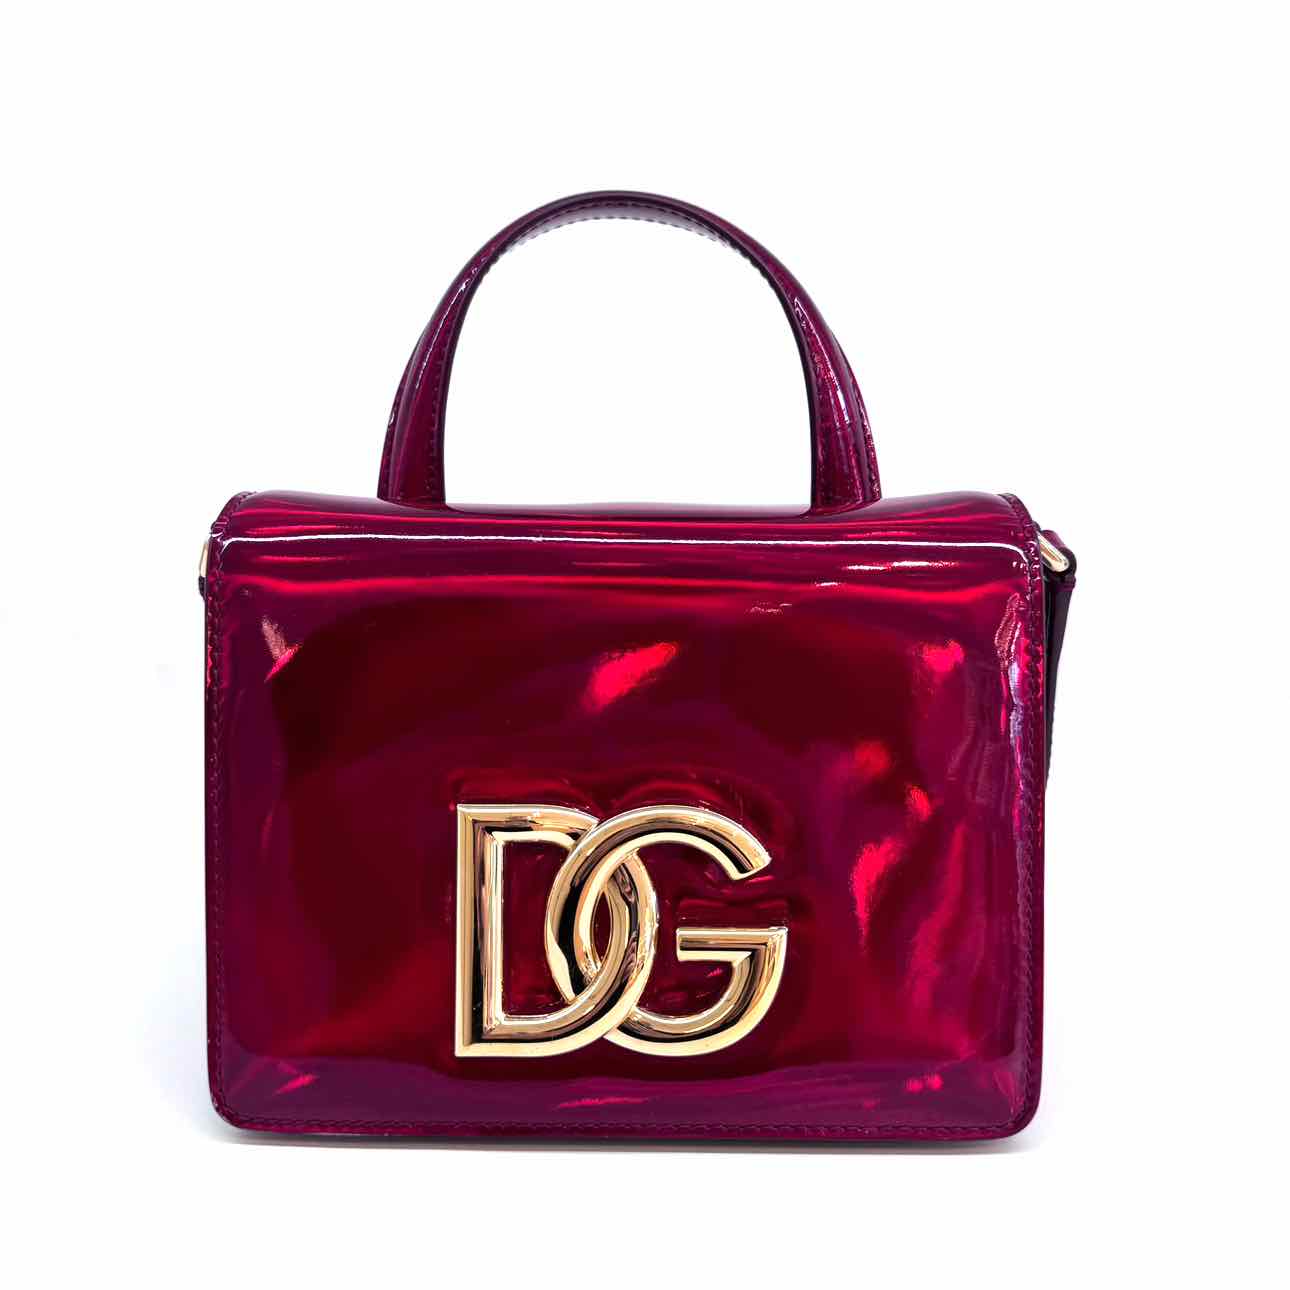 New Arrival - DOLCE & GABBANA Patent Leather Small Bag